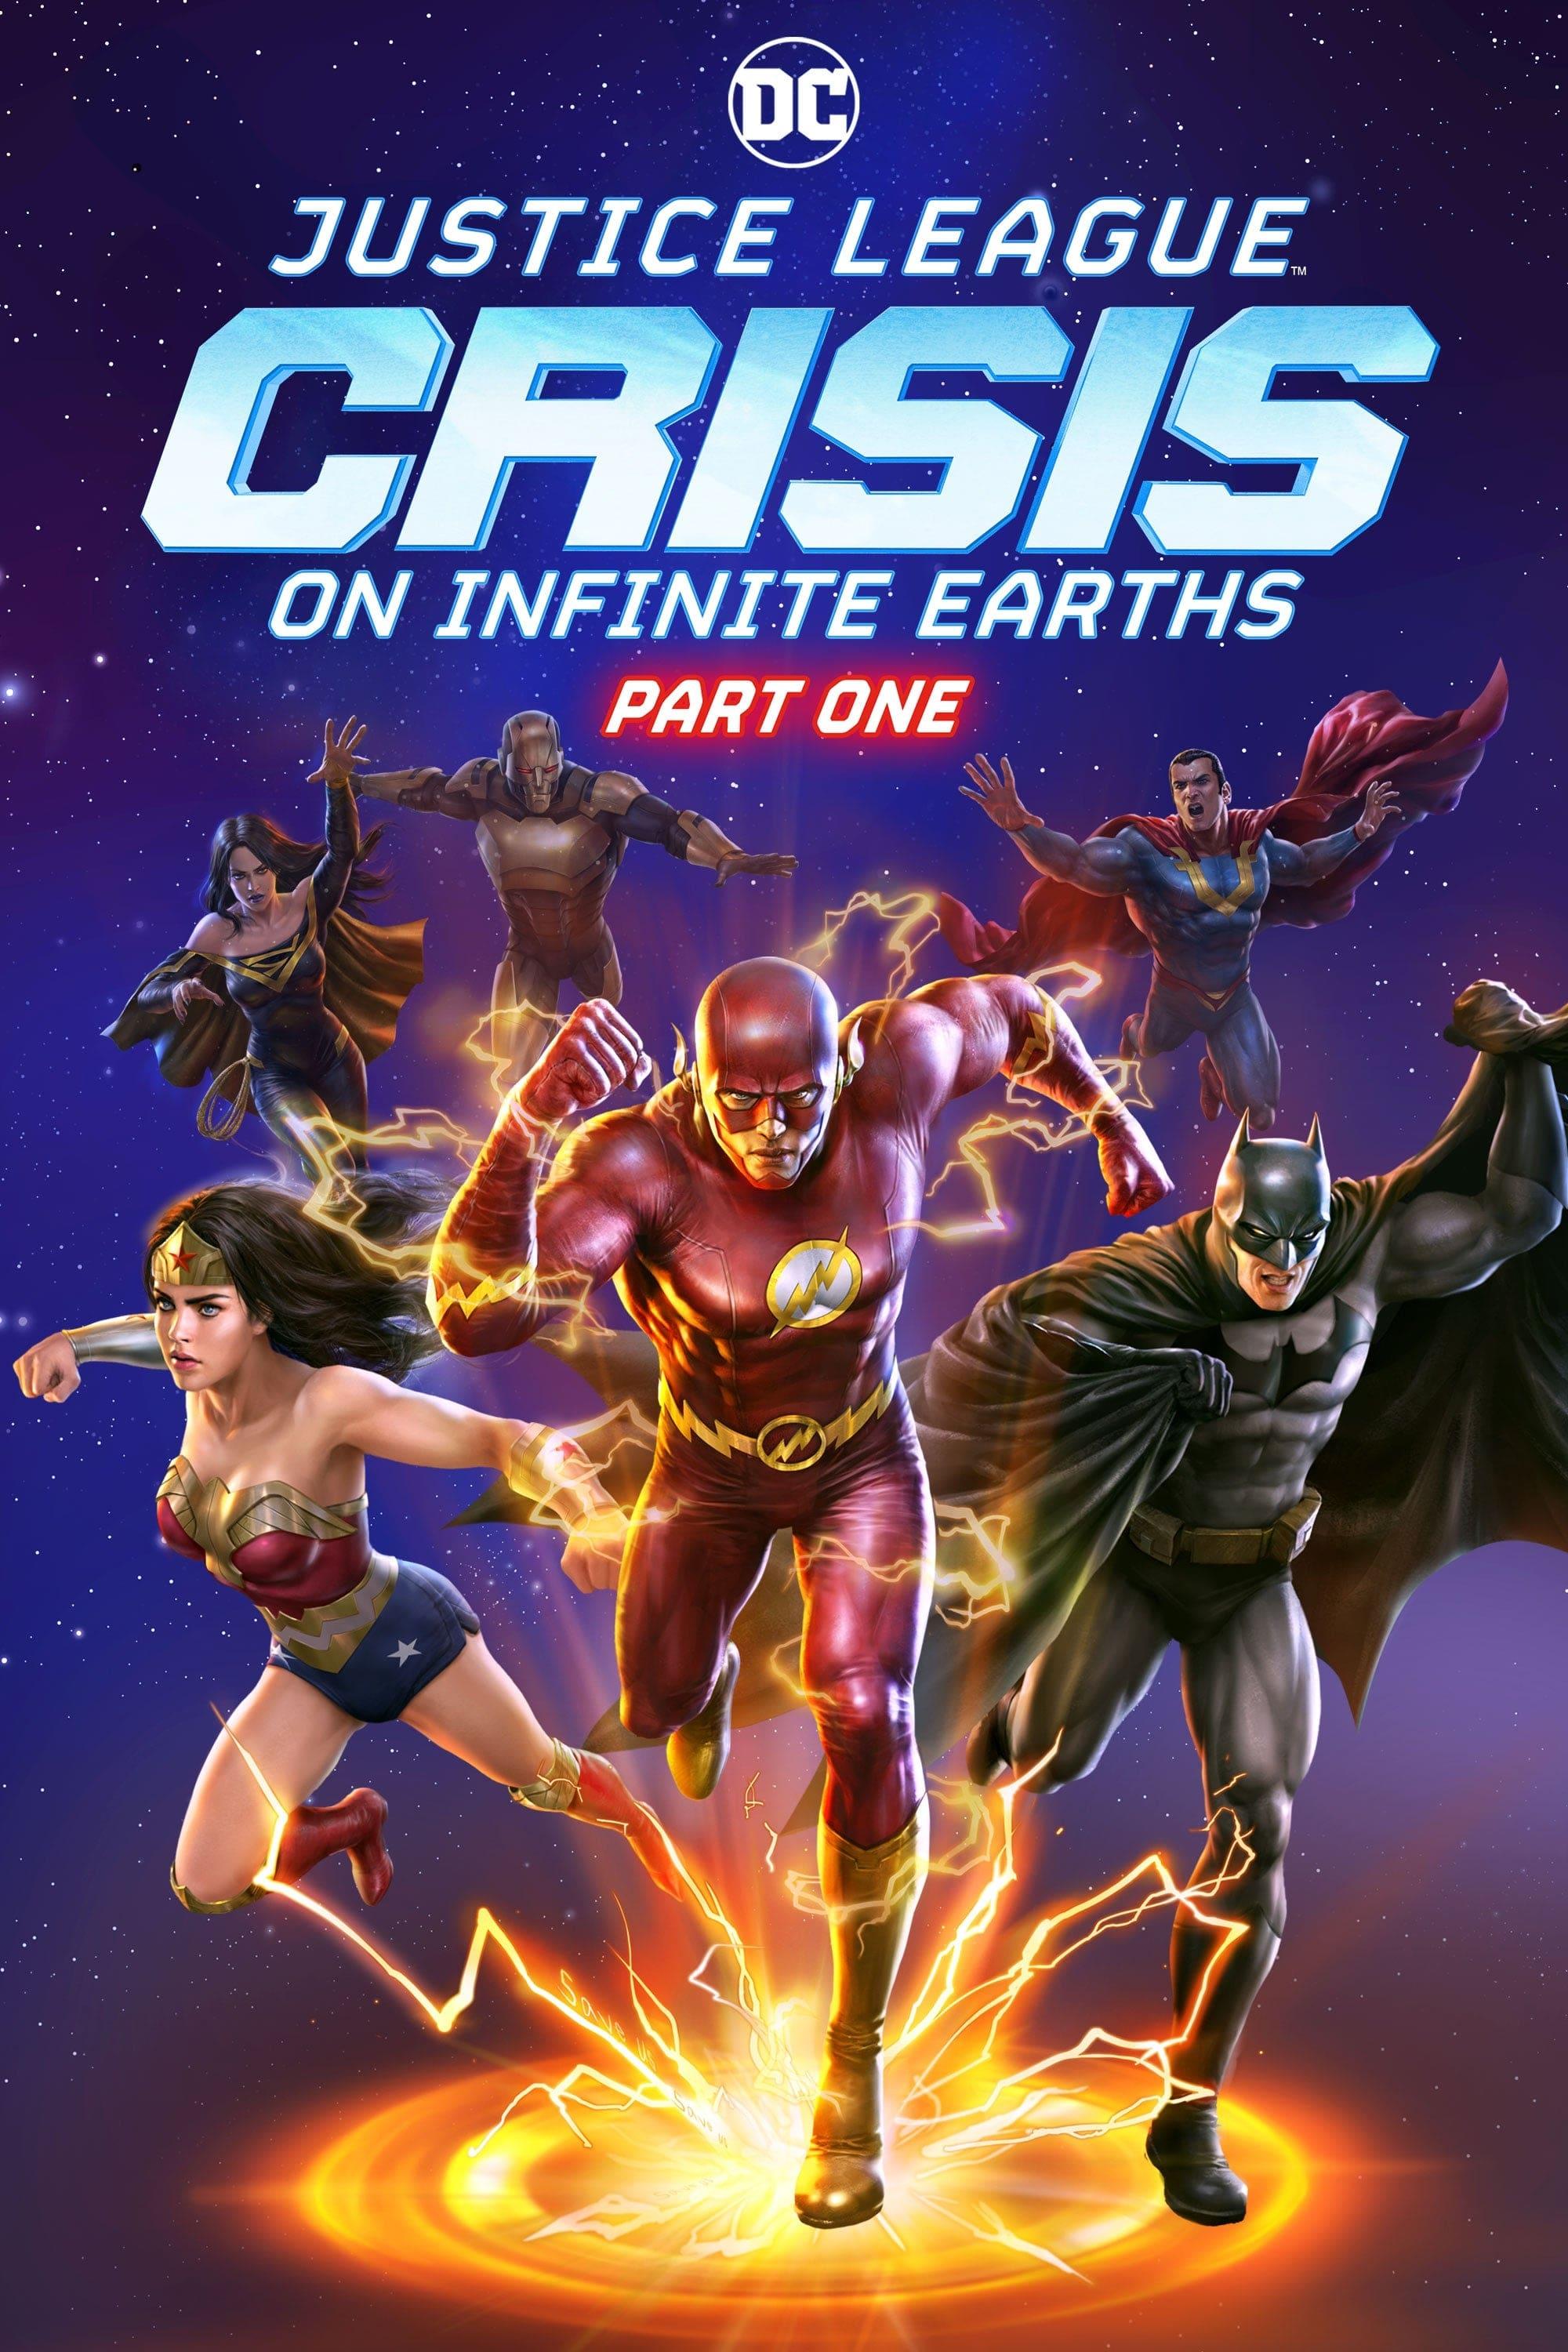 Justice League: Crisis on Infinite Earths Part One poster